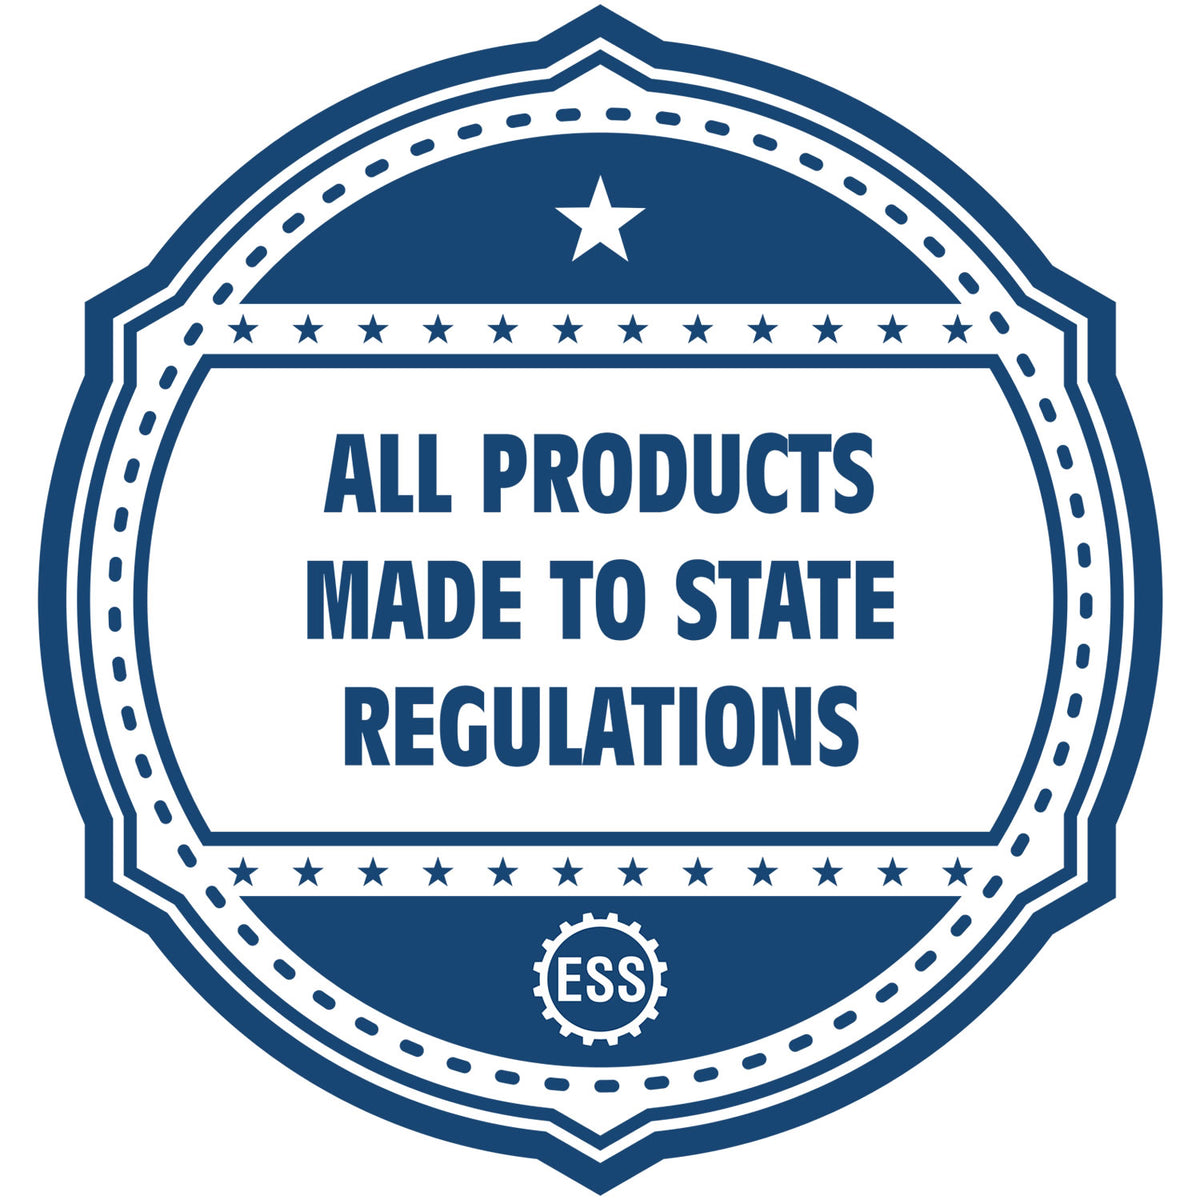 An icon or badge element for the Slim Pre-Inked New Mexico Professional Engineer Seal Stamp showing that this product is made in compliance with state regulations.